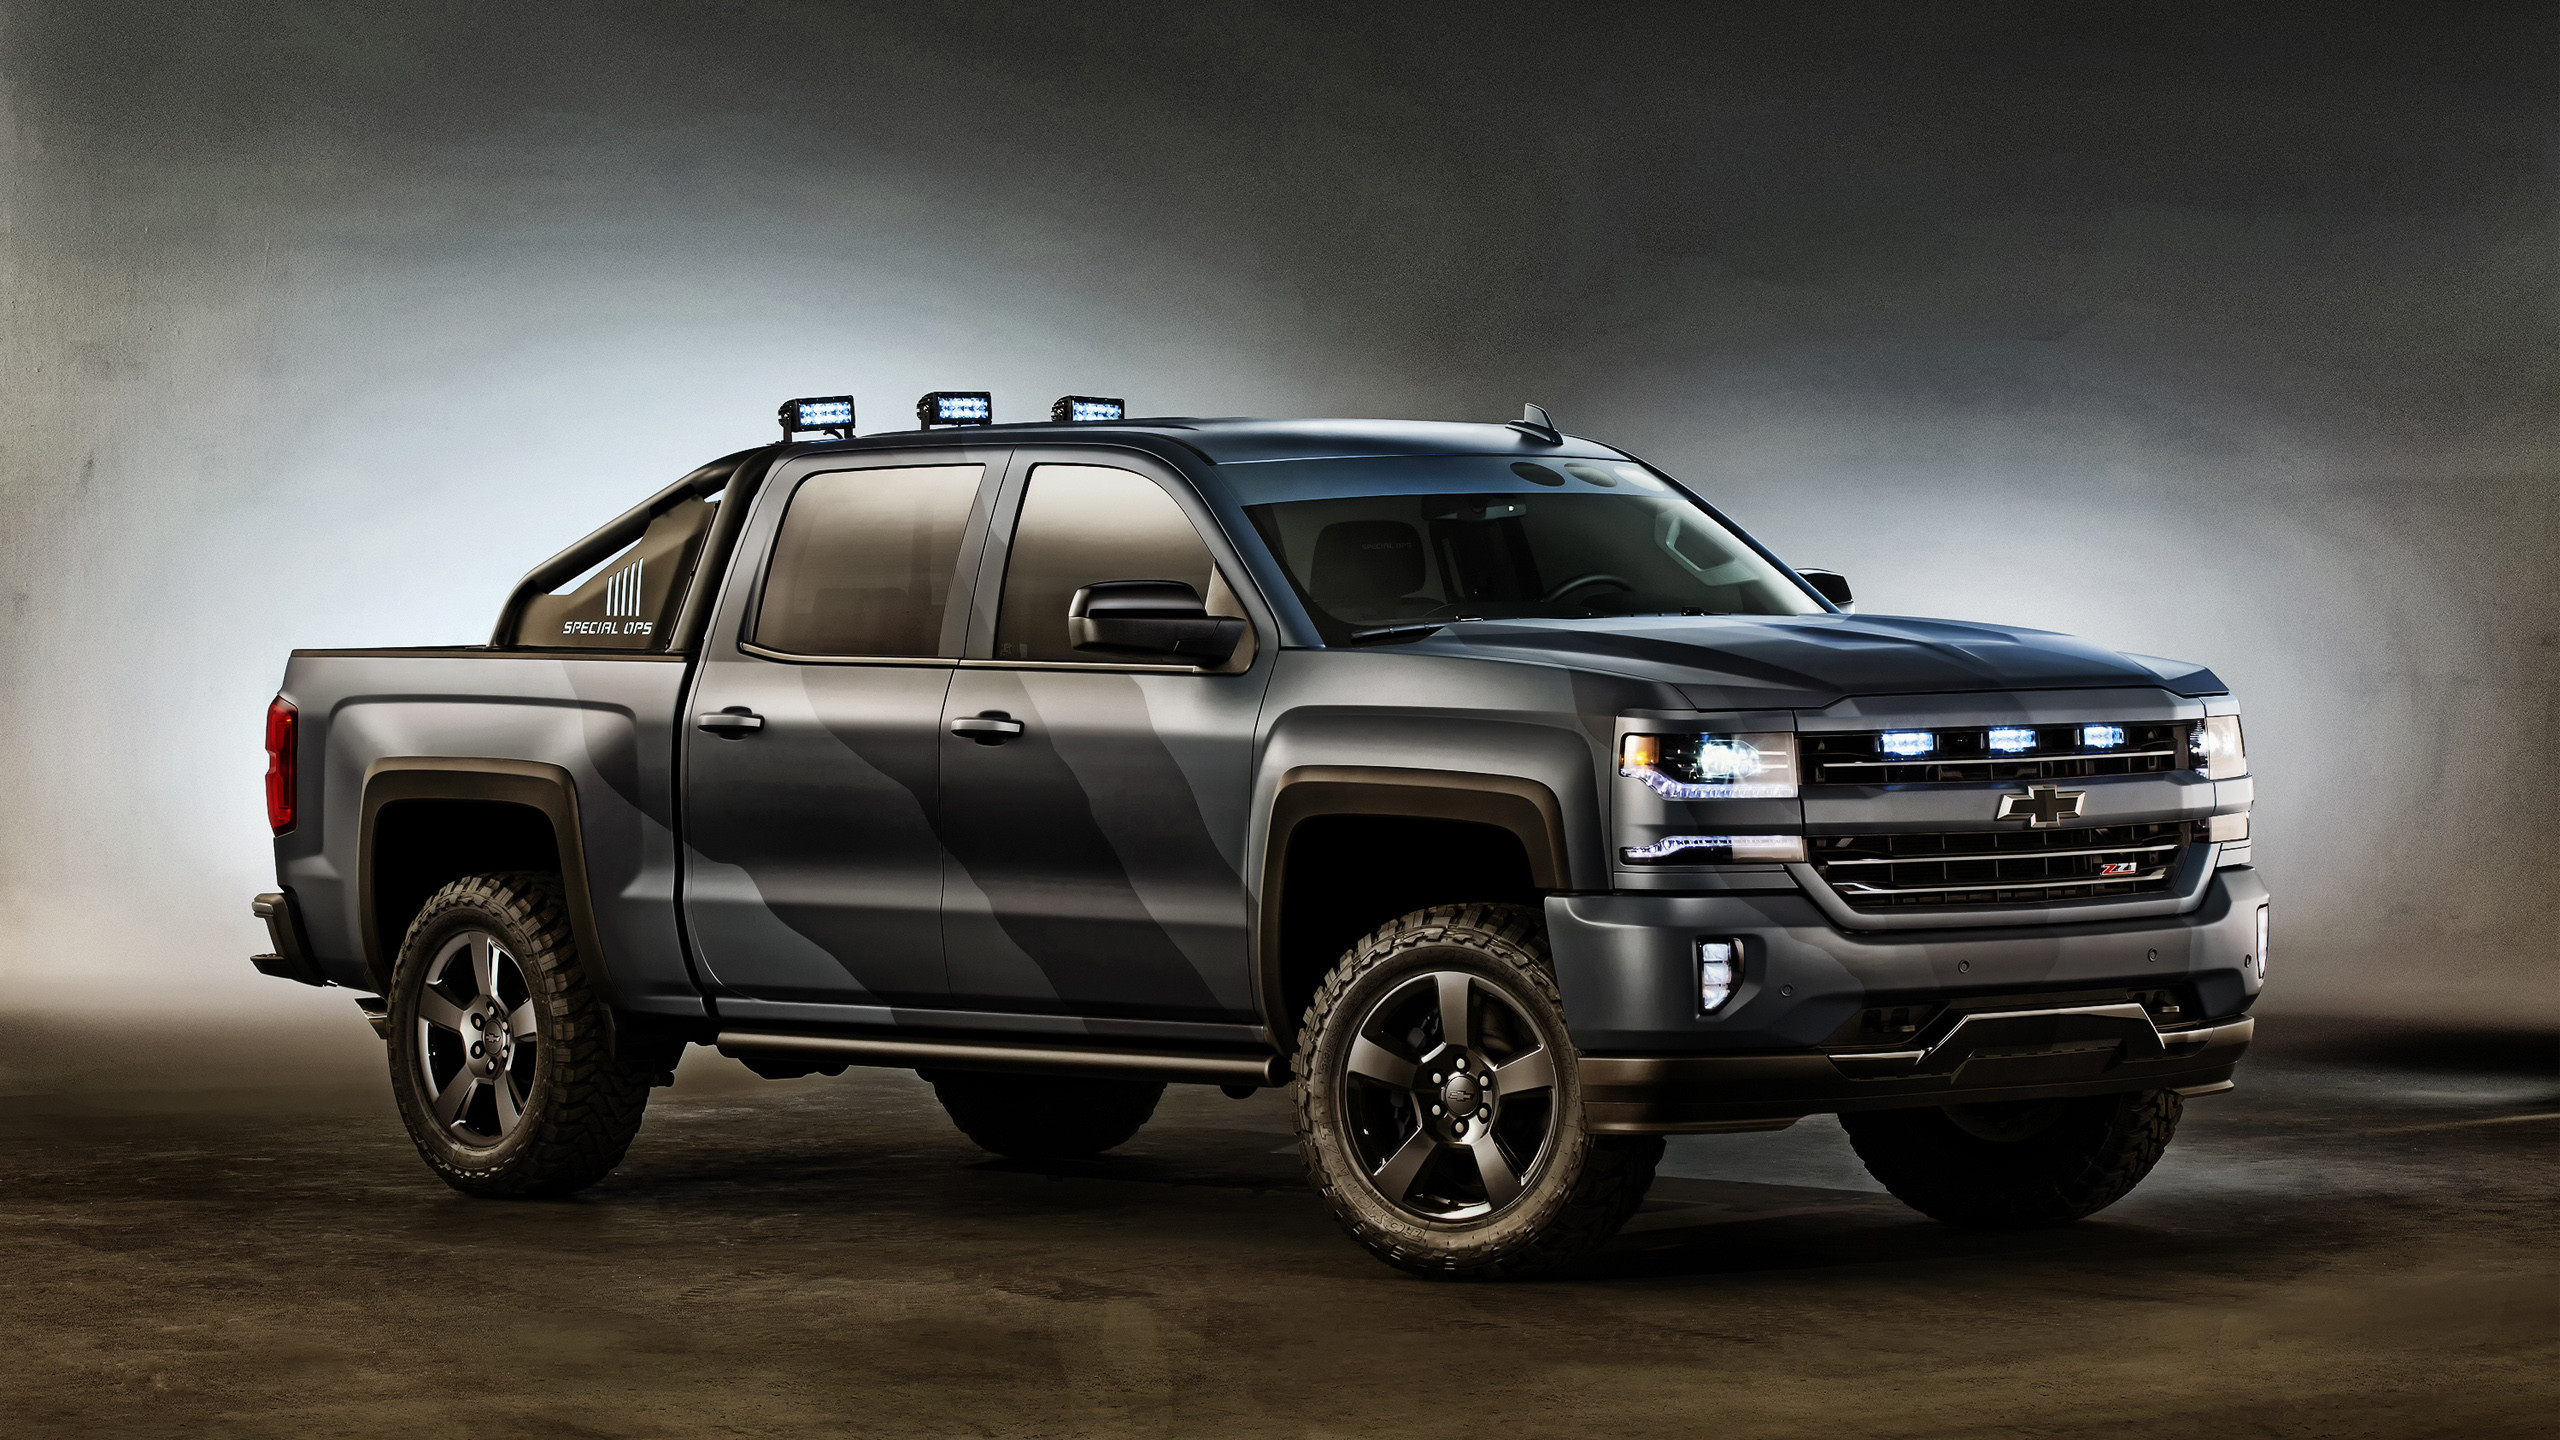 2560x1440, Chevrolet Silverado Wallpapers - 2019 Chevy Avalanche Price , HD Wallpaper & Backgrounds